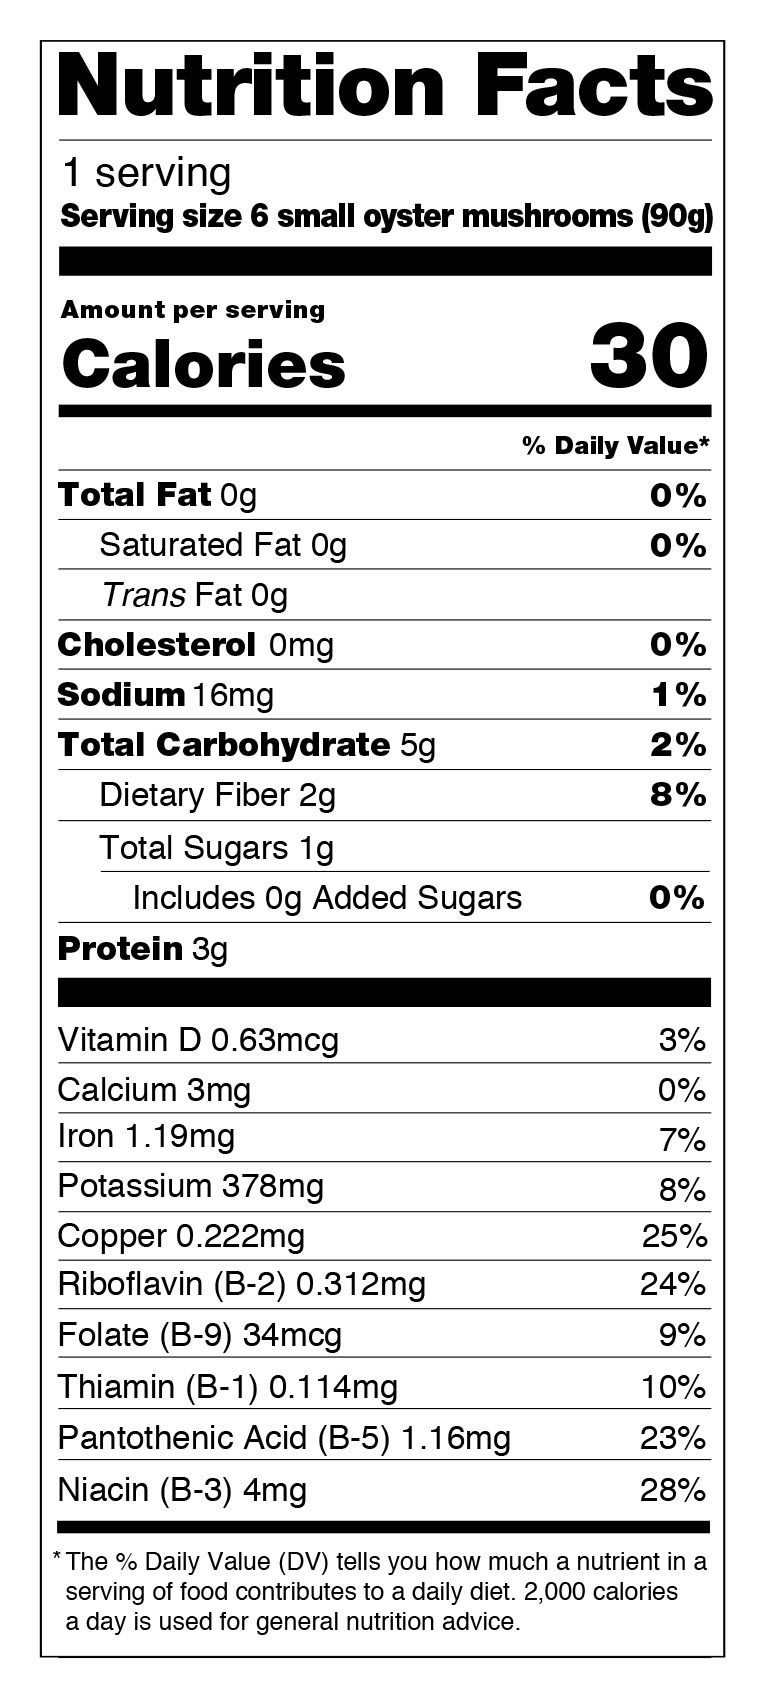 Nutrition facts label for raw oyster mushrooms